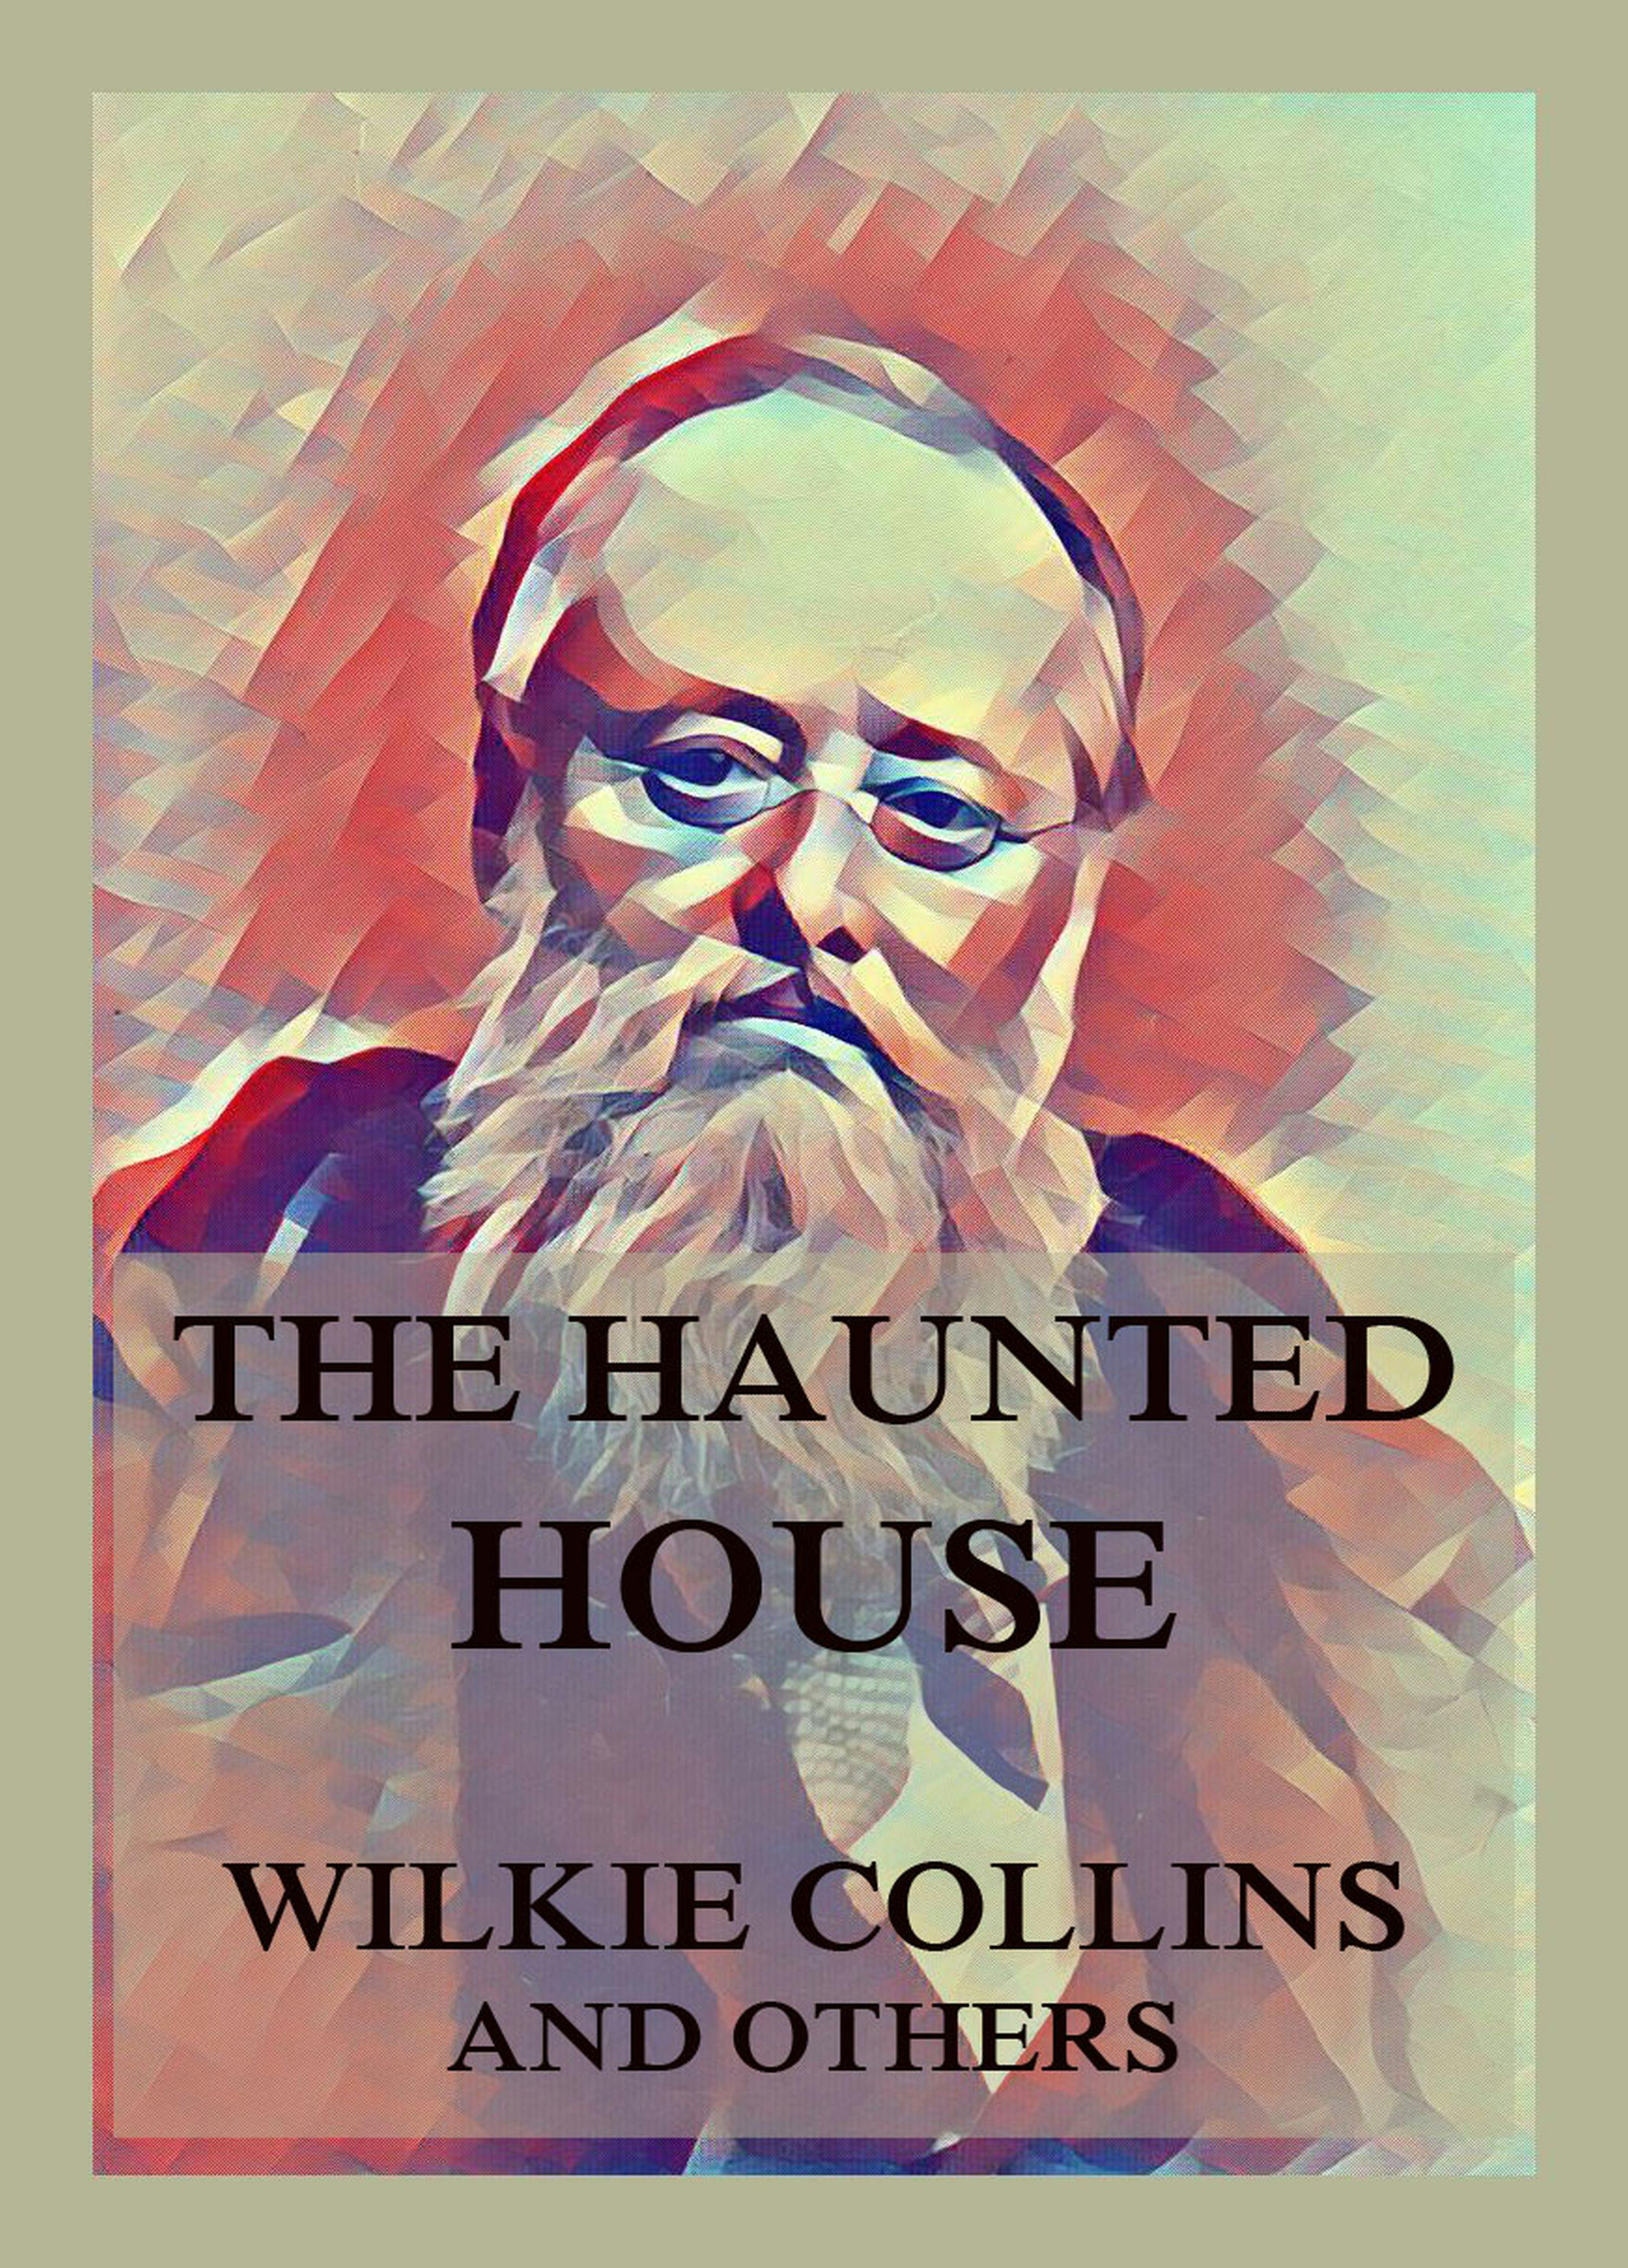 The Haunted House - Wilkie Collins, Elizabeth Gaskell, George Sala, Charles Dickens, Hesba Stretton, Adelaide Anne Procter